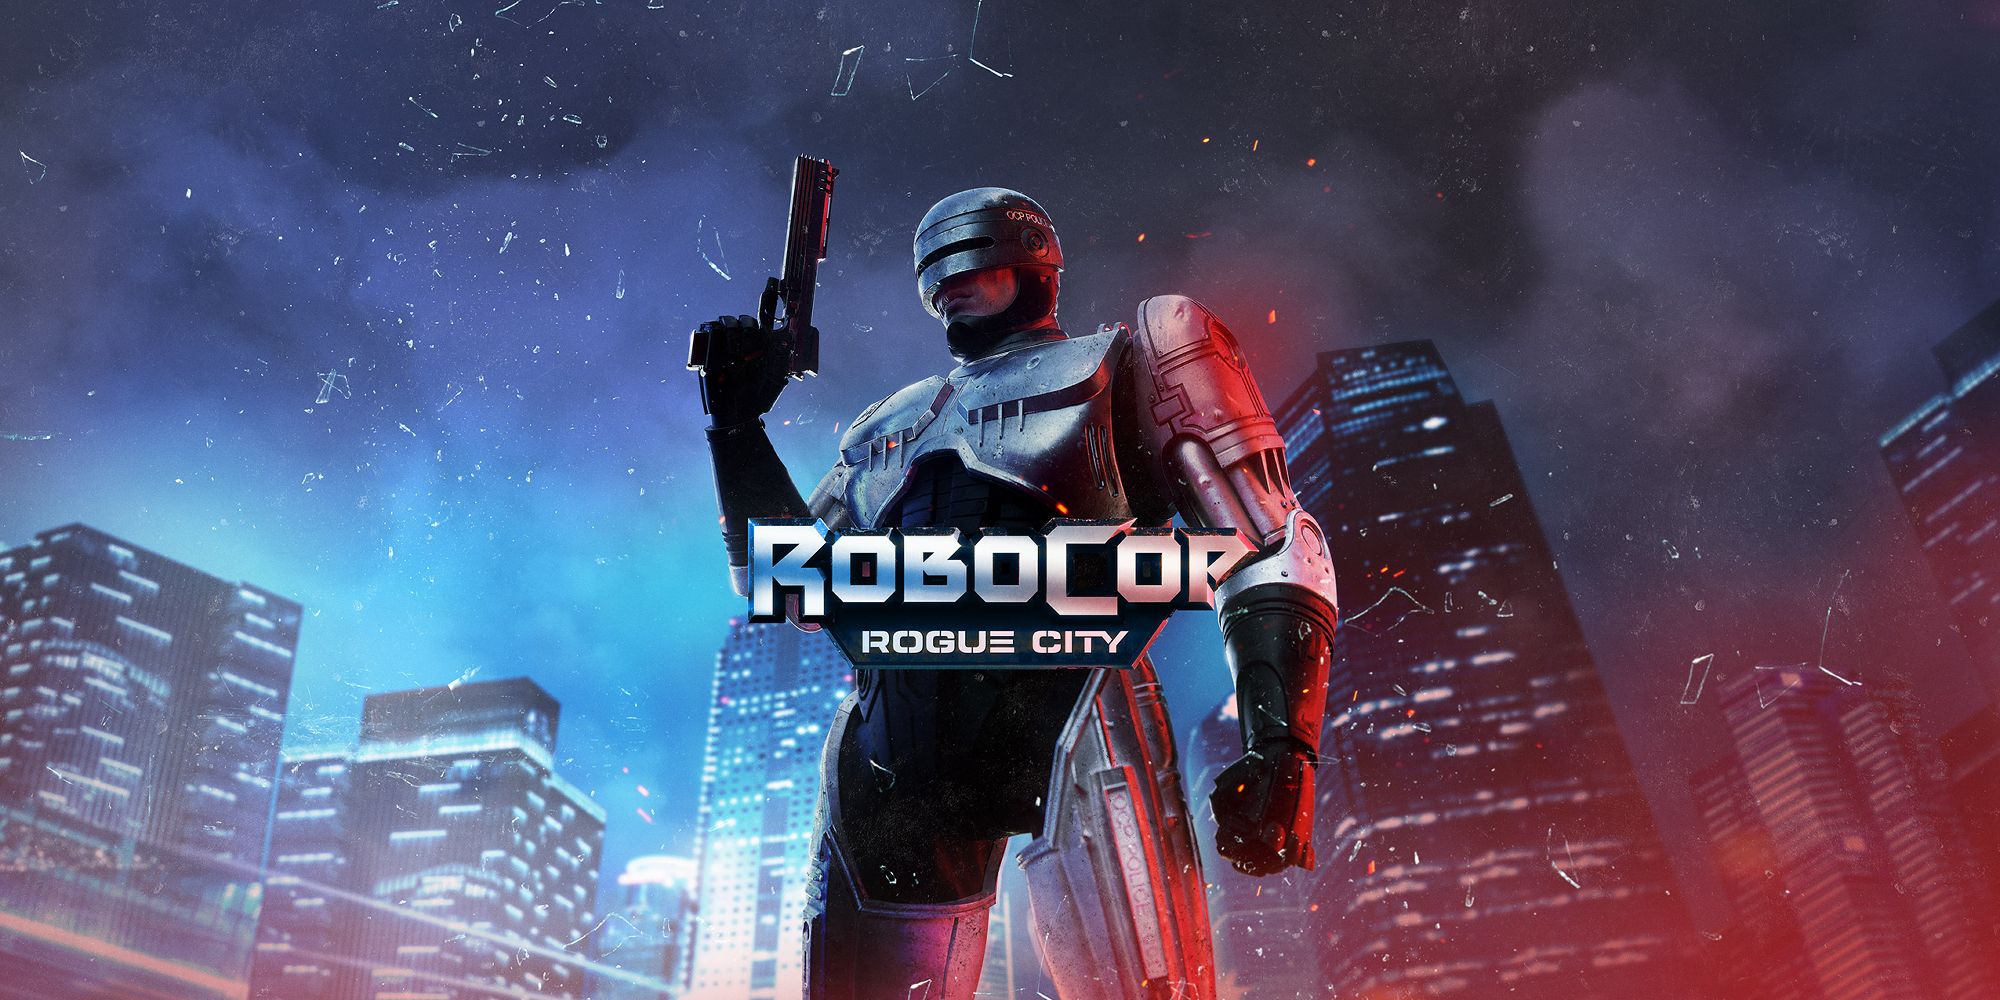 RoboCop Rogue City Title Showing RoboCop Against The Backdrop Of The City